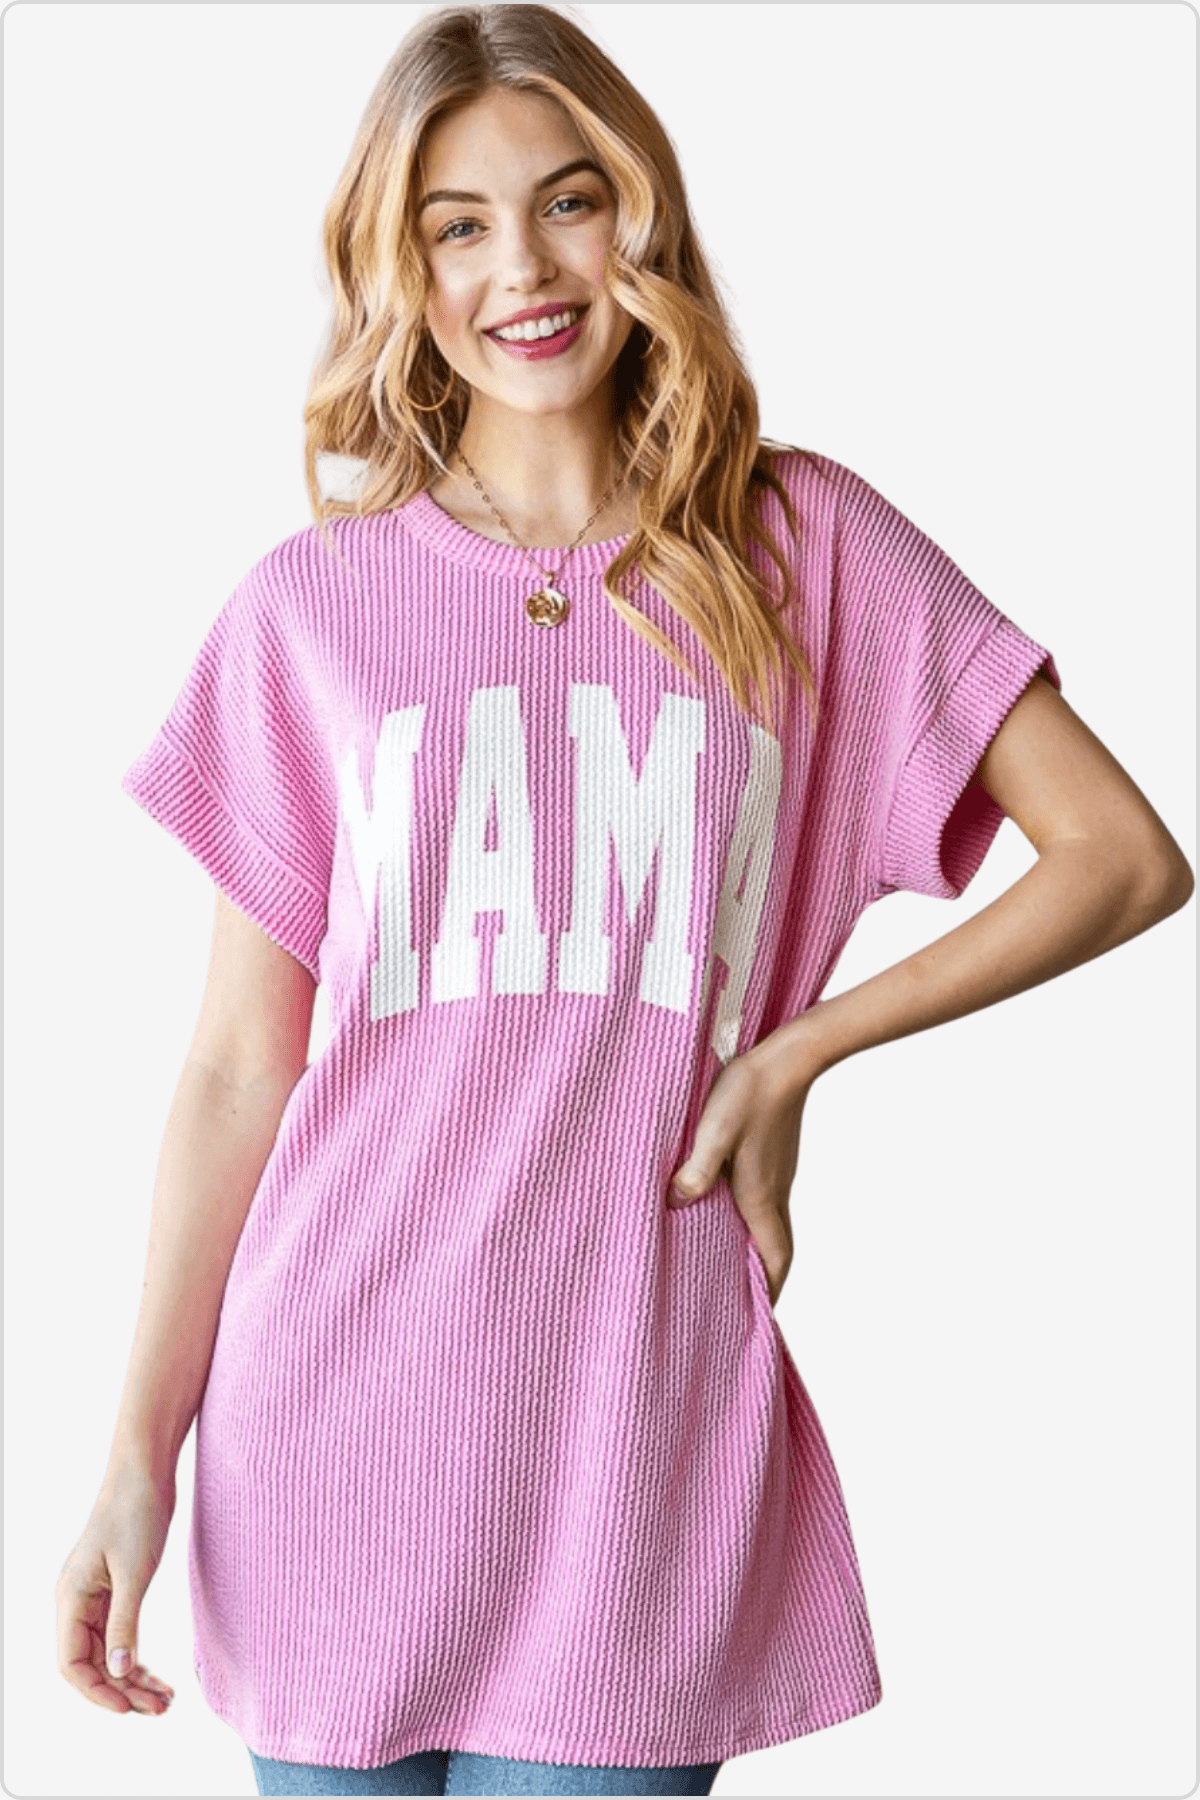 Smiling woman modeling a pink knitted t-shirt with MAMA print.